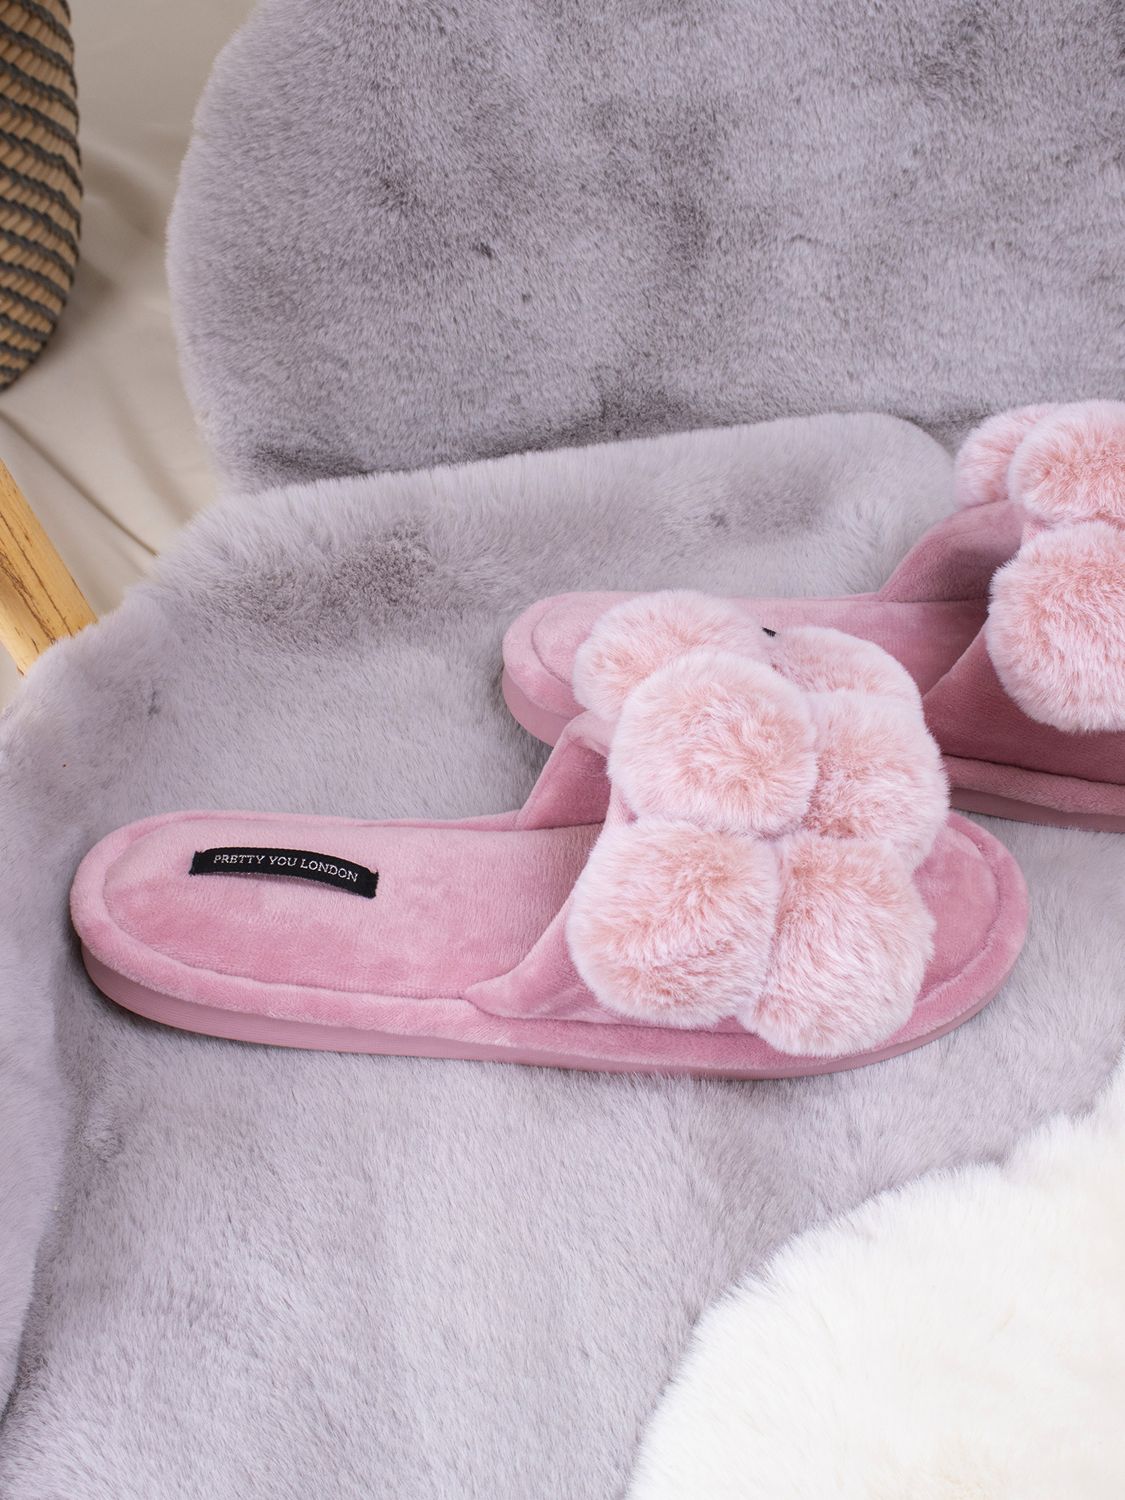 Pretty You London Dolly Slippers, Pink at John Lewis & Partners